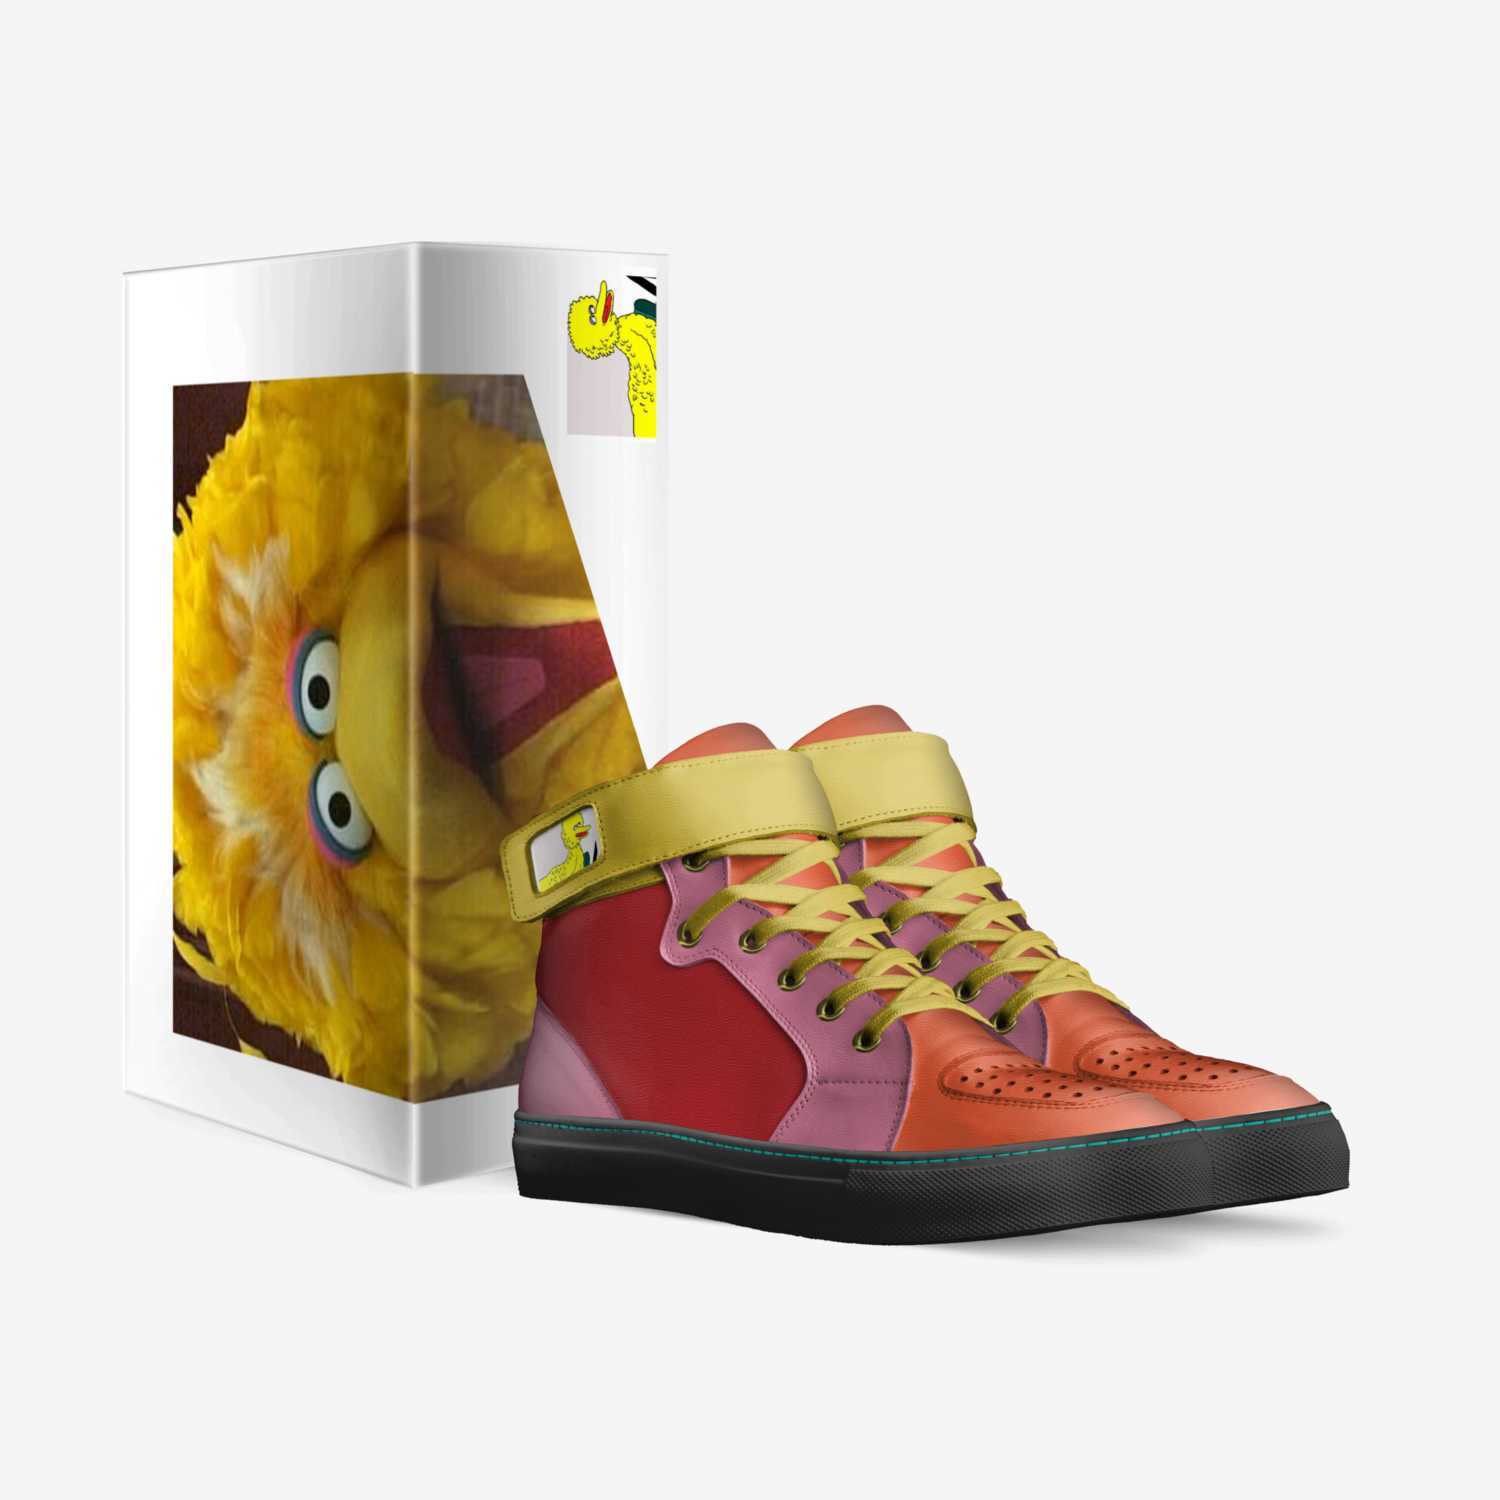 The Big Bird custom made in Italy shoes by Marty Hendricks | Box view